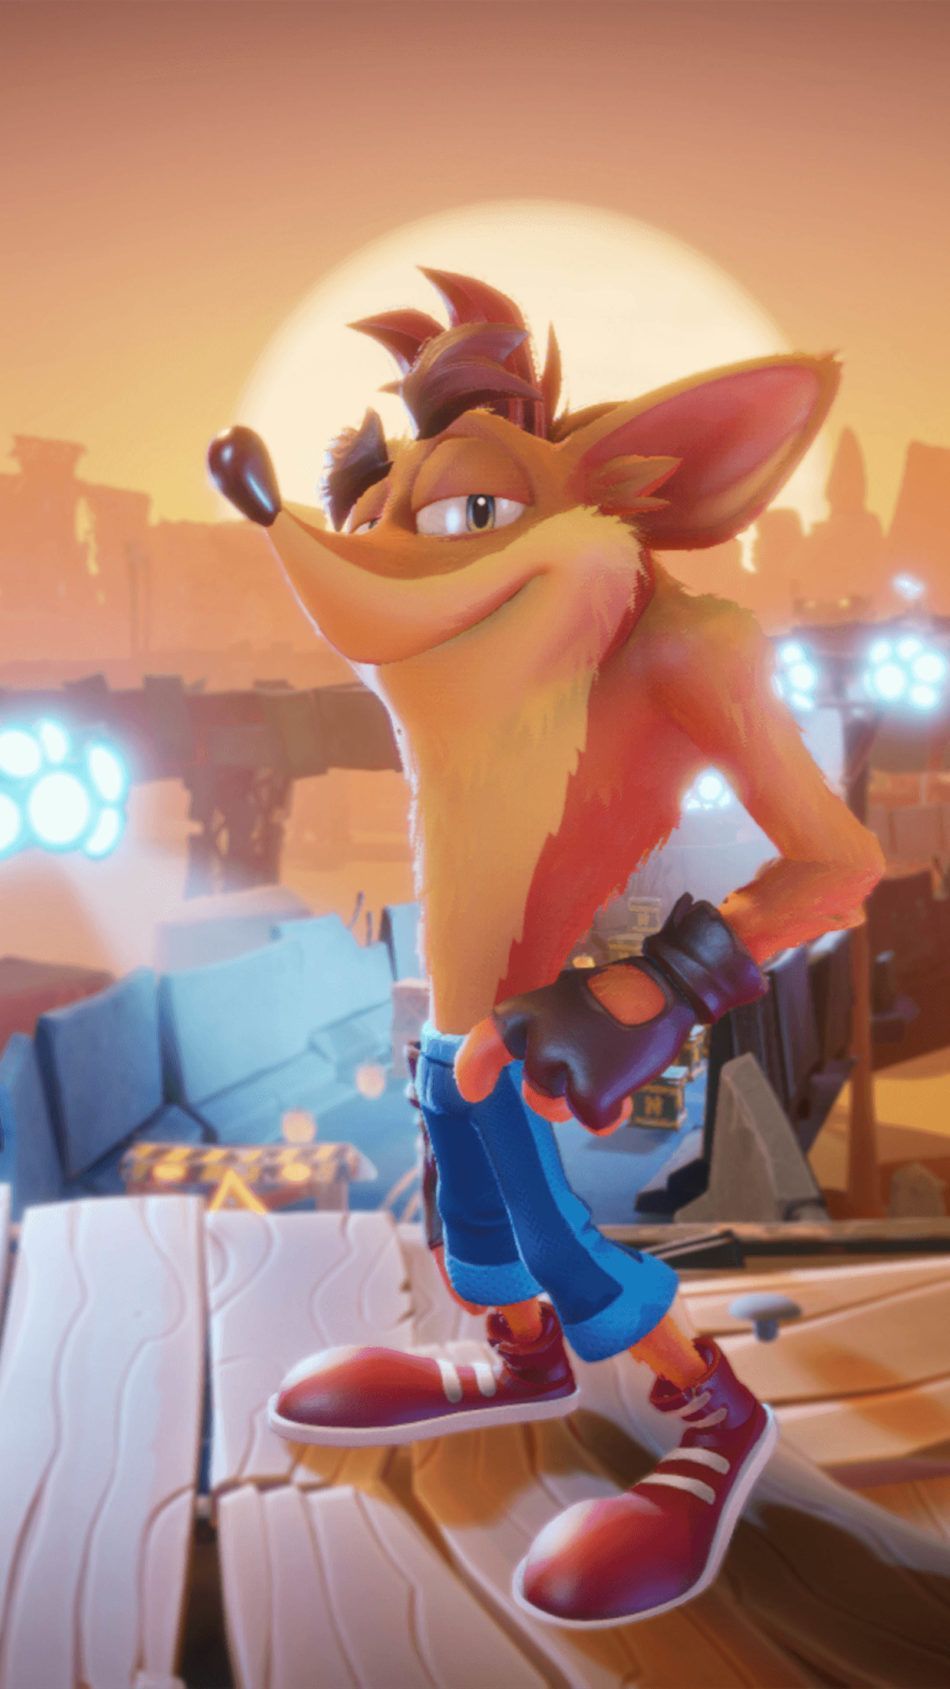 Crash Bandicoot 4 It's About Time Game 2020 4K Ultra HD Mobile Wallpaper. Crash bandicoot, Bandicoot, Crash